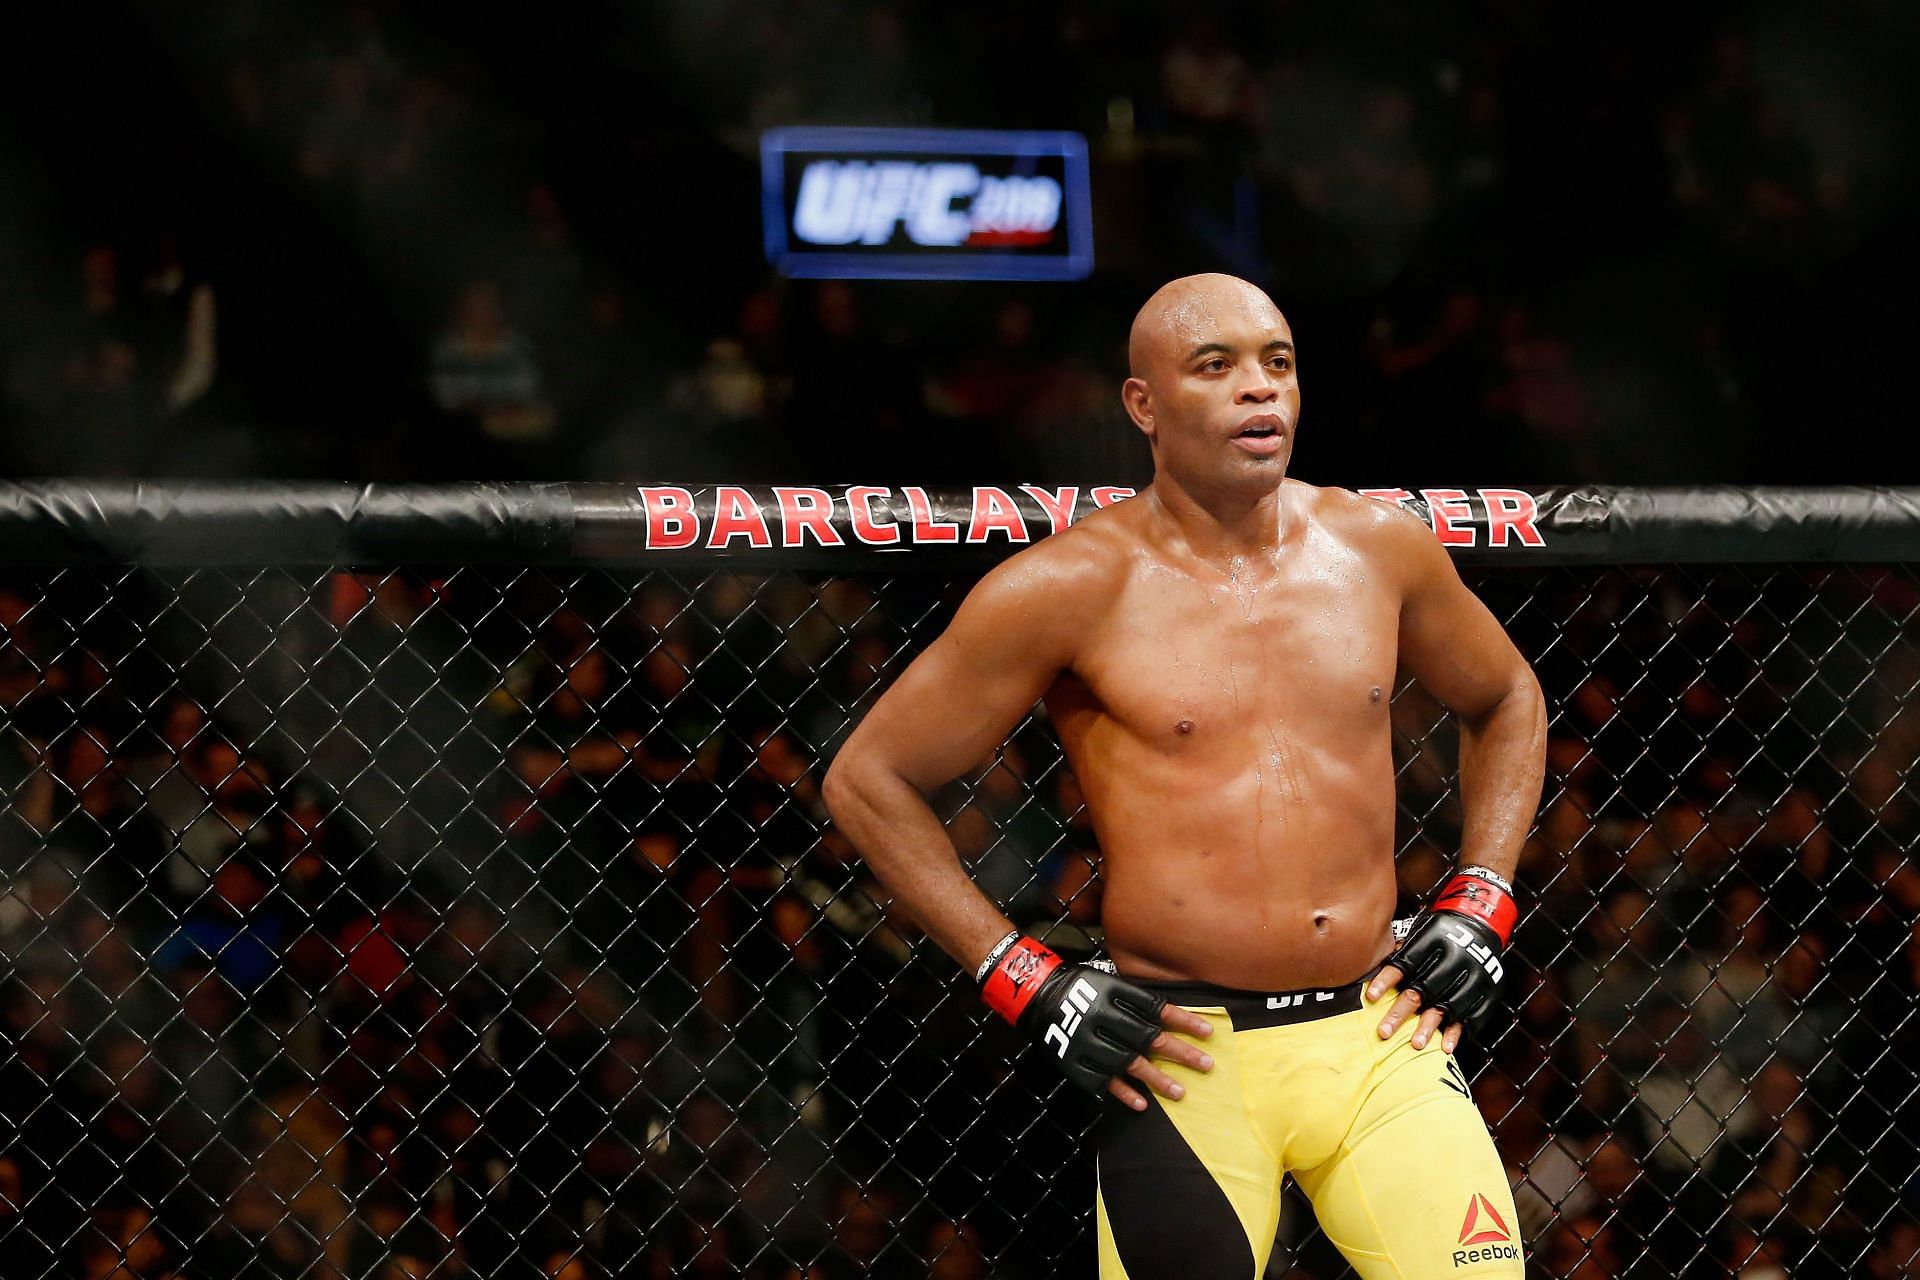 If Anderson Silva were in his prime, there&#039;s little doubt he&#039;d still dominate the middleweight division